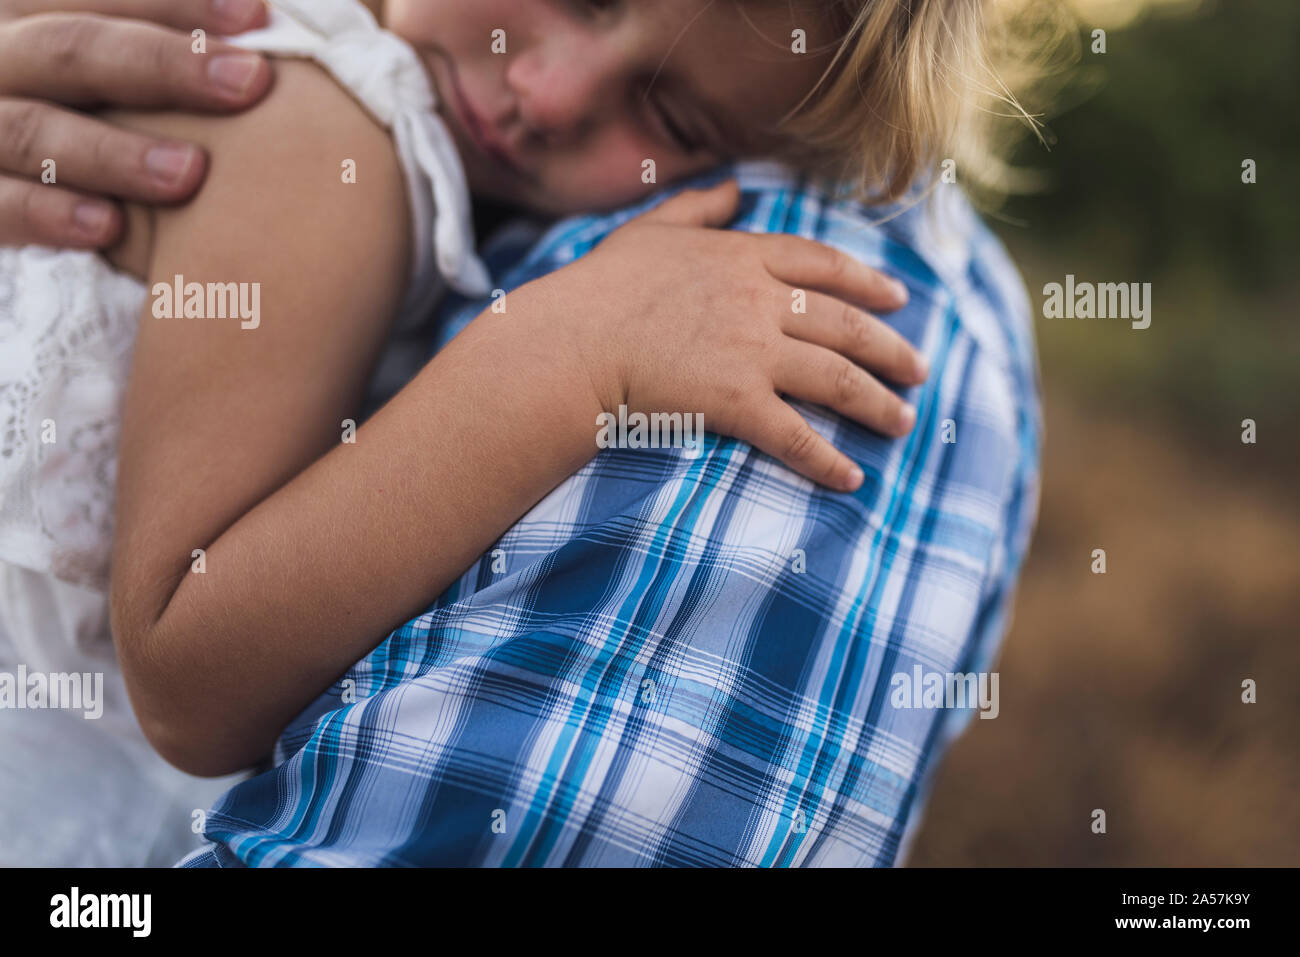 Sleeping child snuggles on her dad's shoulder in a sunny meadow Stock Photo